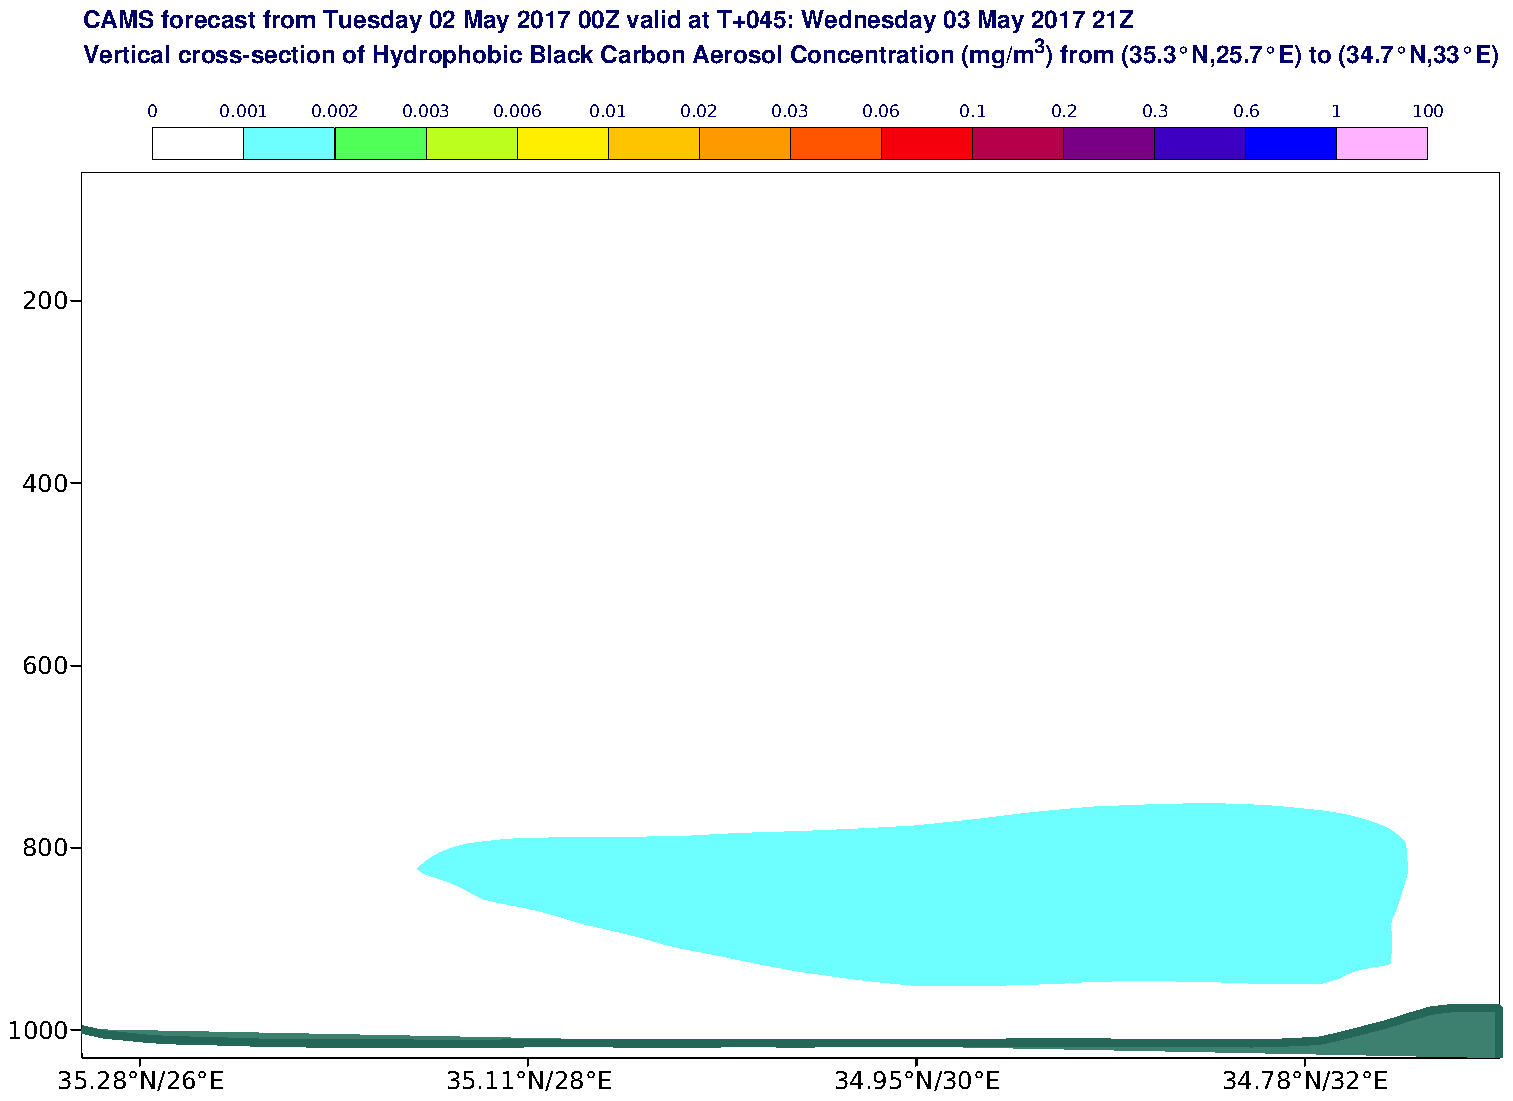 Vertical cross-section of Hydrophobic Black Carbon Aerosol Concentration (mg/m3) valid at T45 - 2017-05-03 21:00